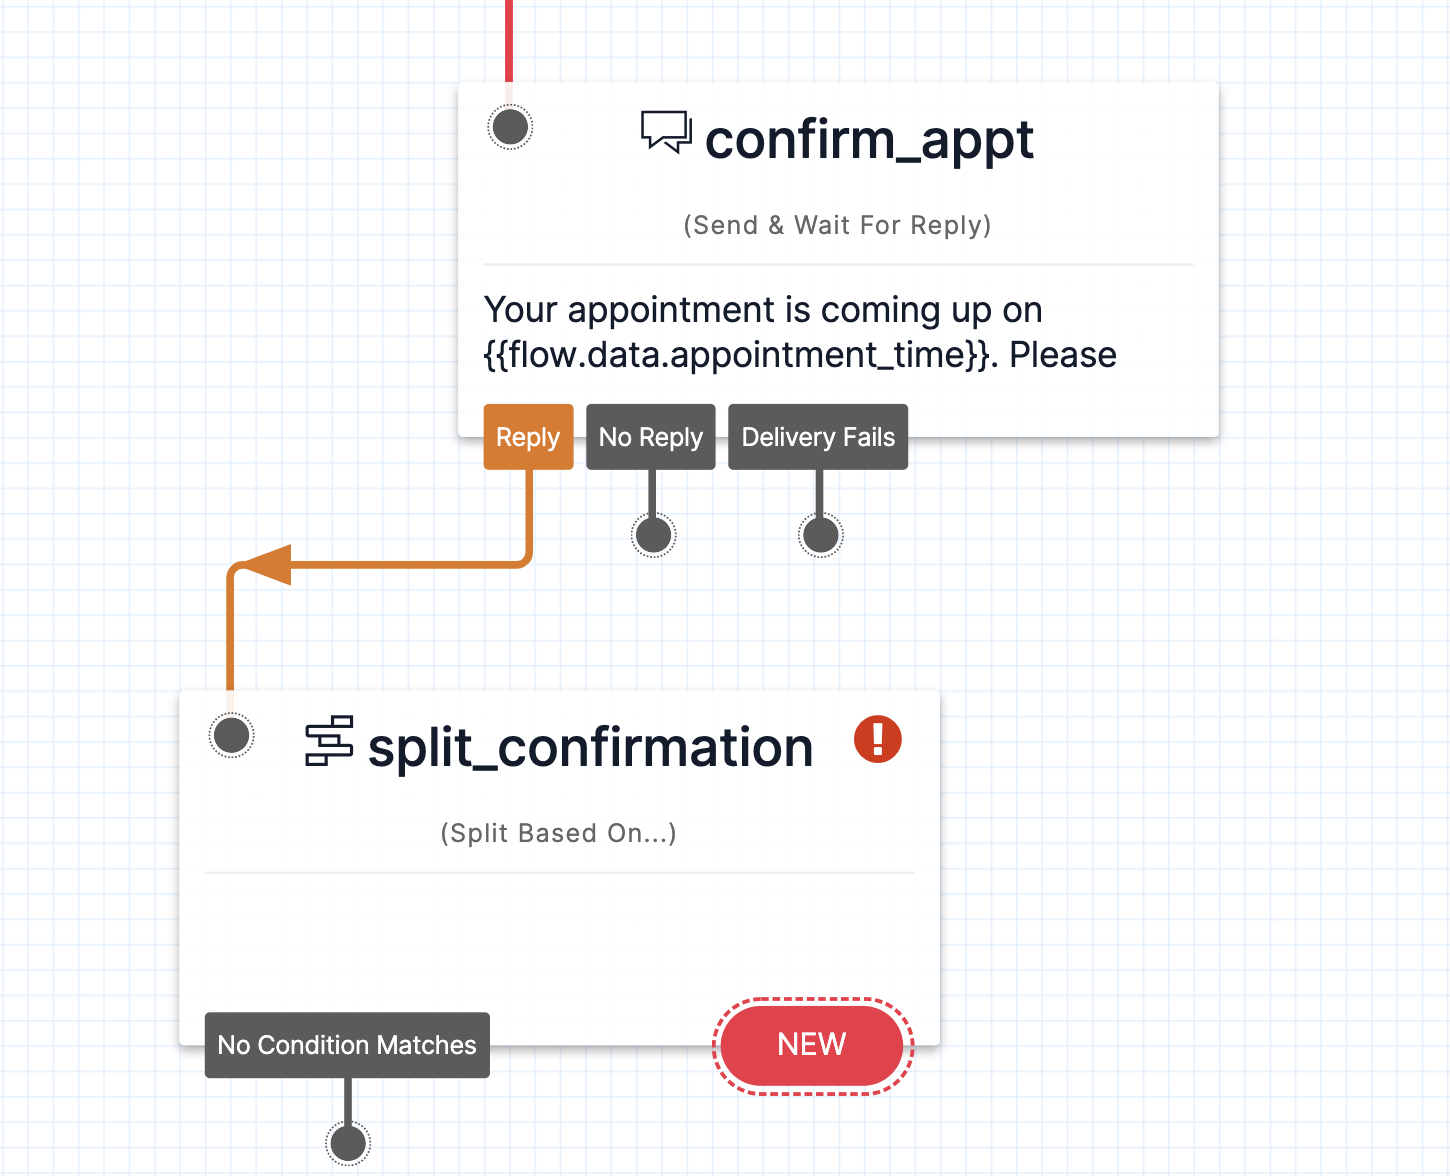 Twilio Studio Tutorial Appointment Reminders Split Based On... Widget placed on Canvas that will evaluate the response to the Send & Wait For Reply Widget.